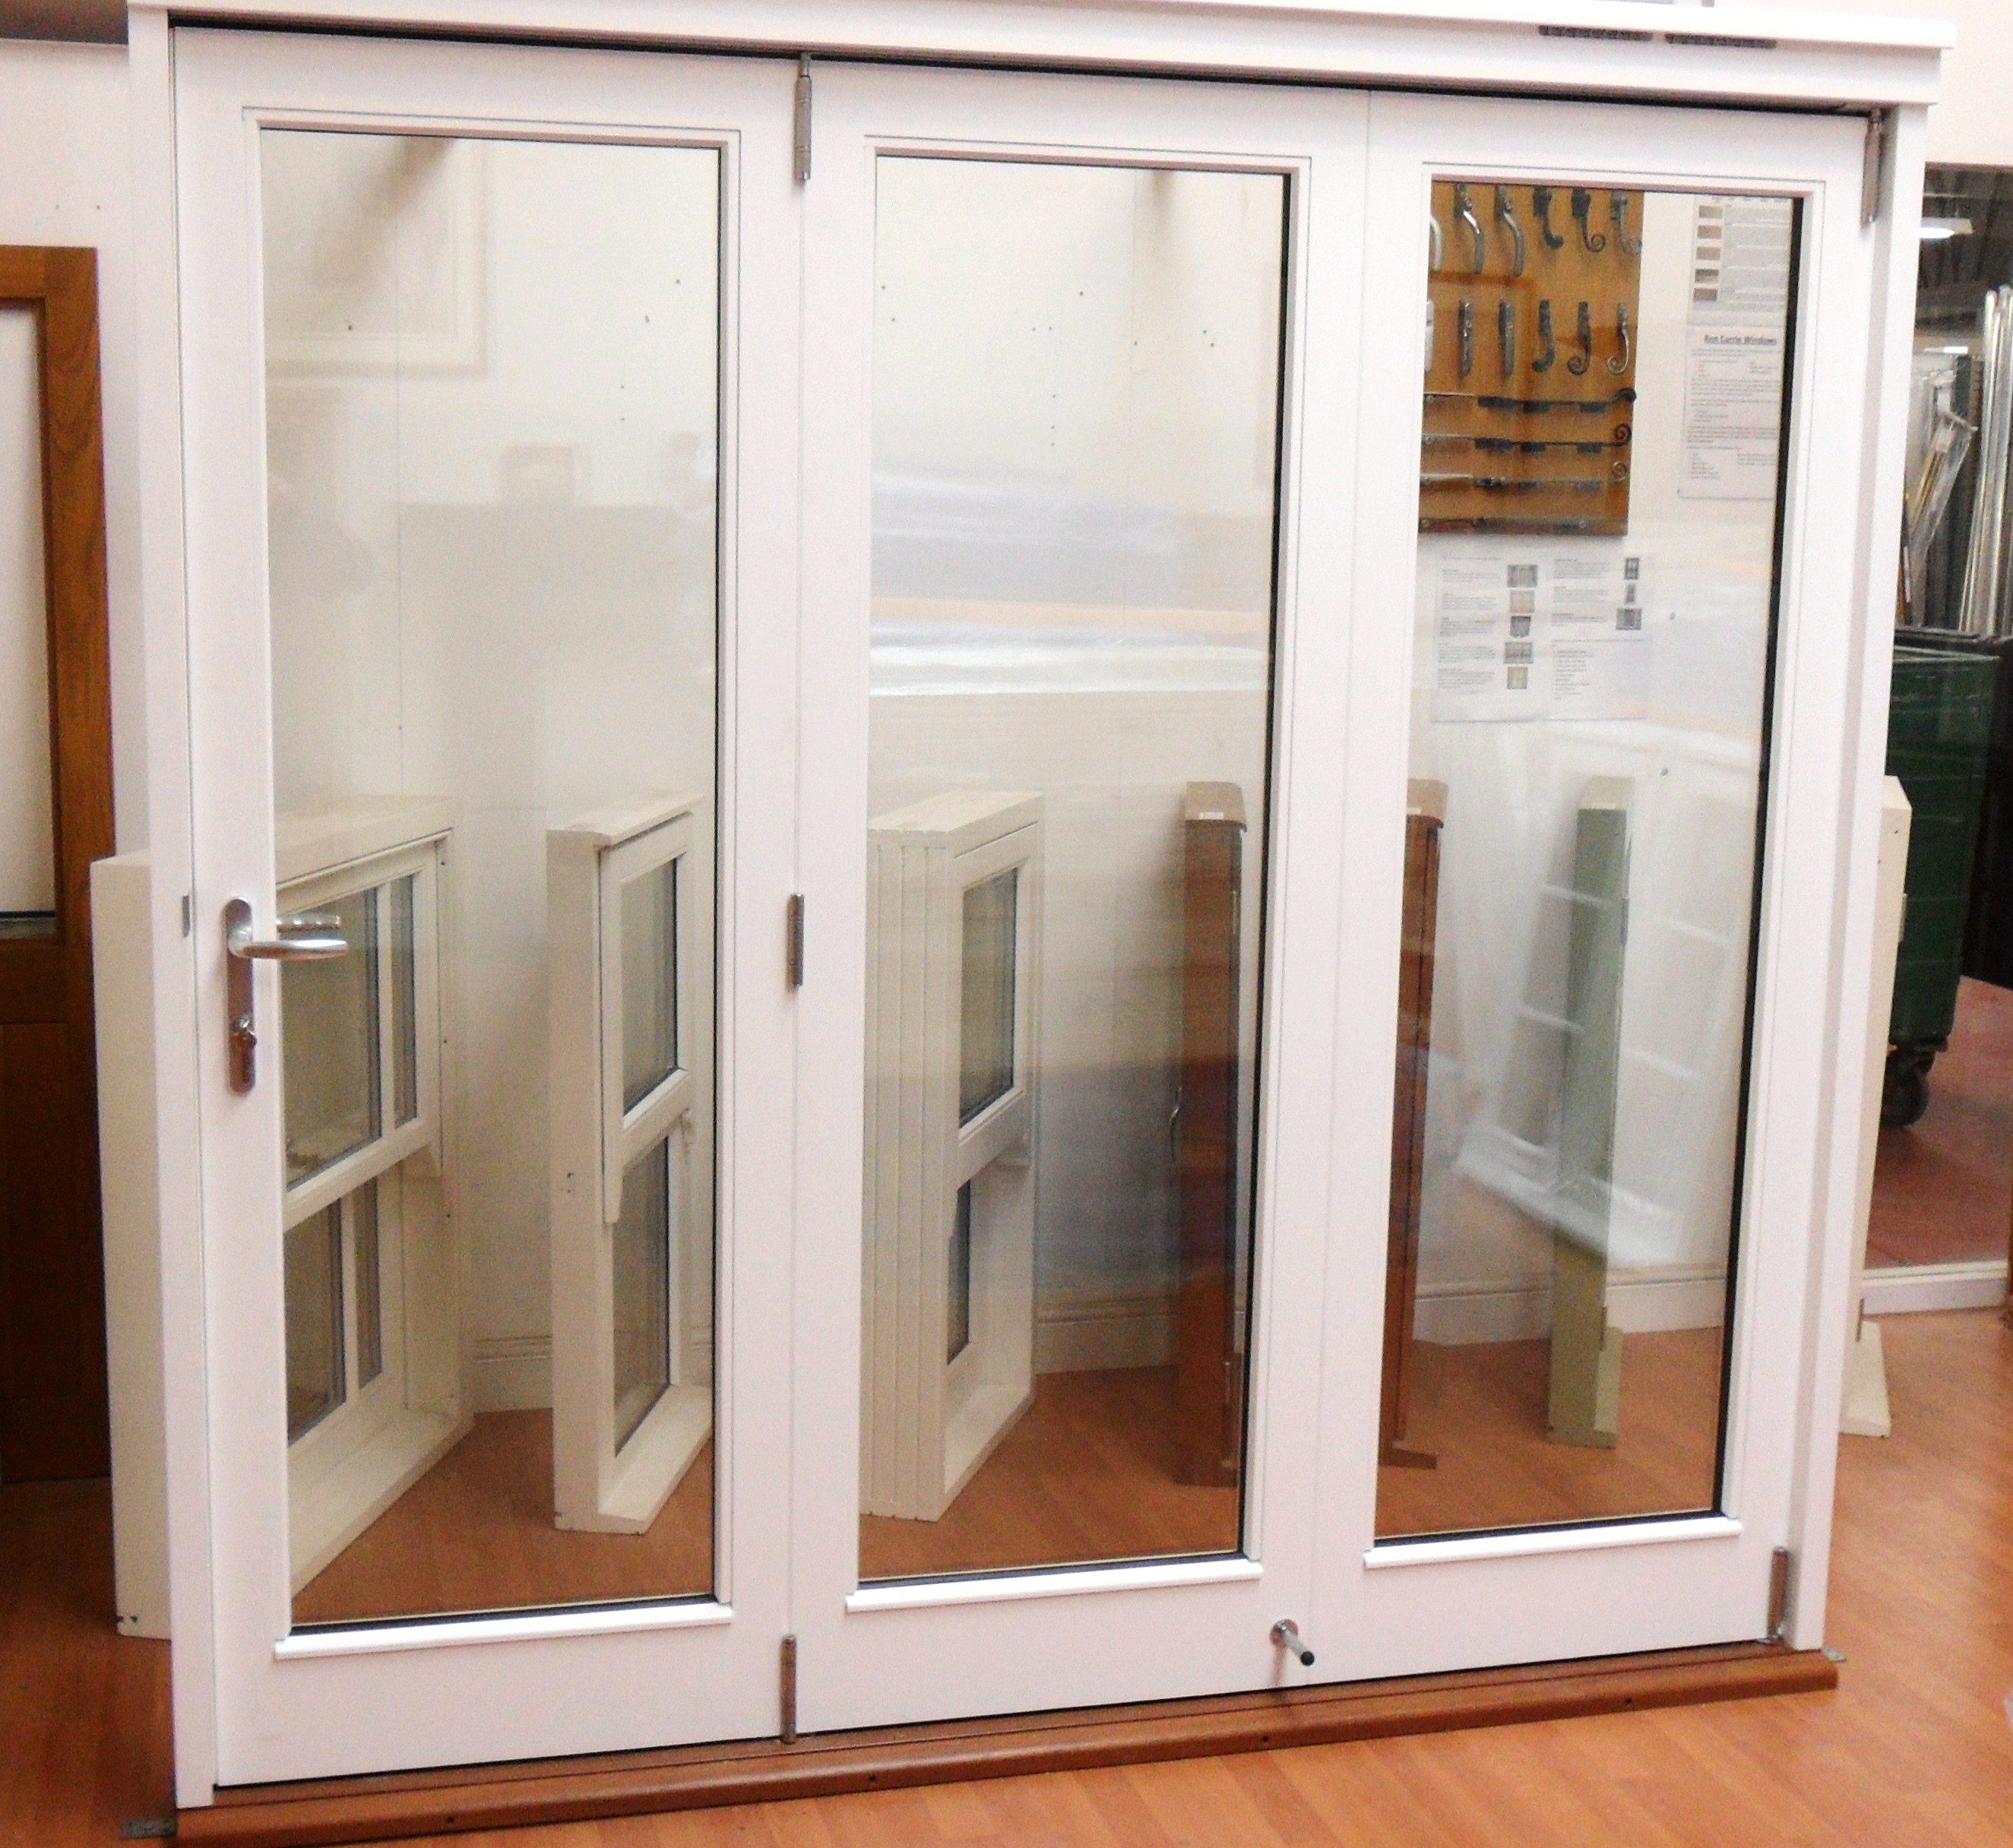 Folding french doors exterior - The door that brings the extra light we ...